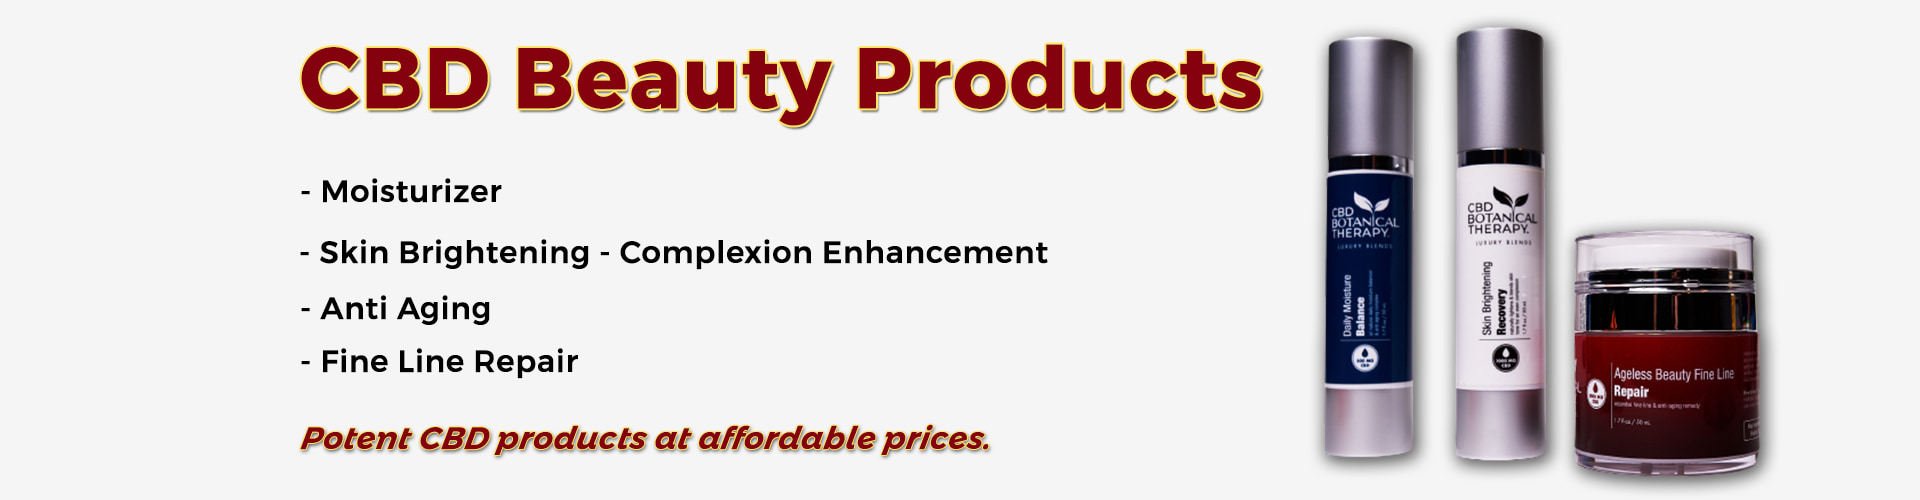 CBD-Banner-Beauty-Products